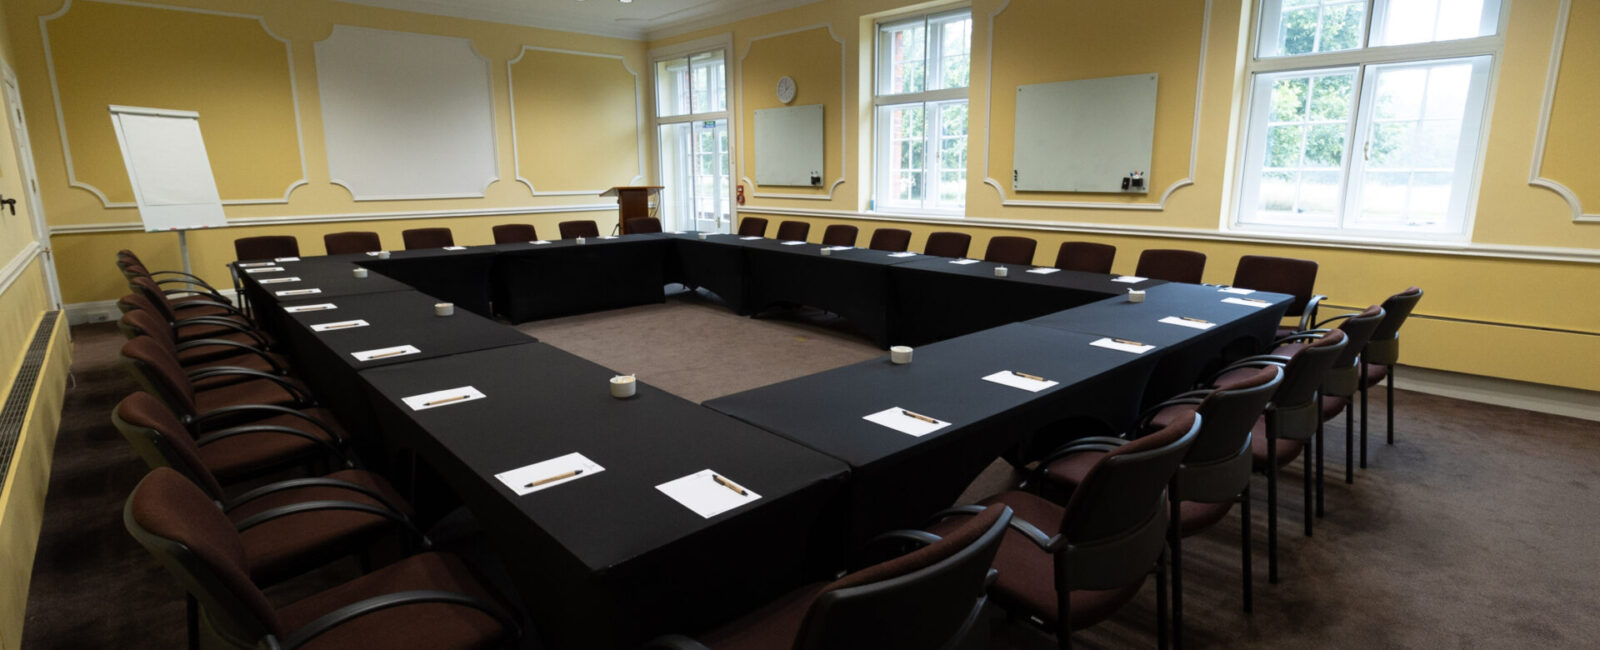 The Sandby conference room, set up in a boardroom layout to accommodate up to 30 people.